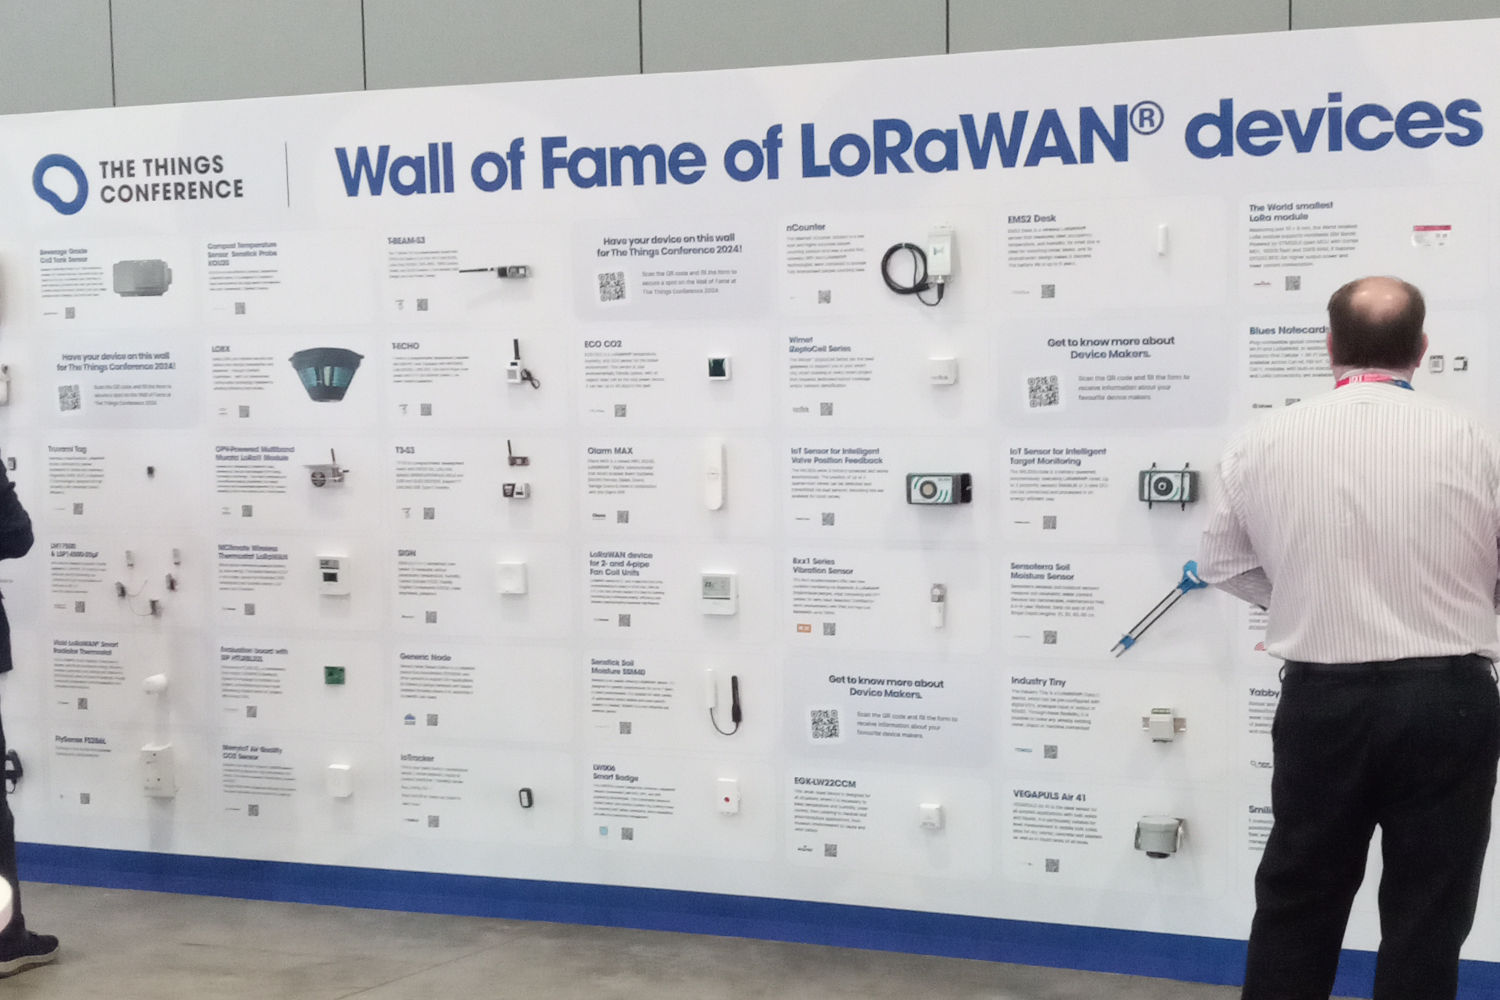 Wall of Fame for LoRaWAN devices